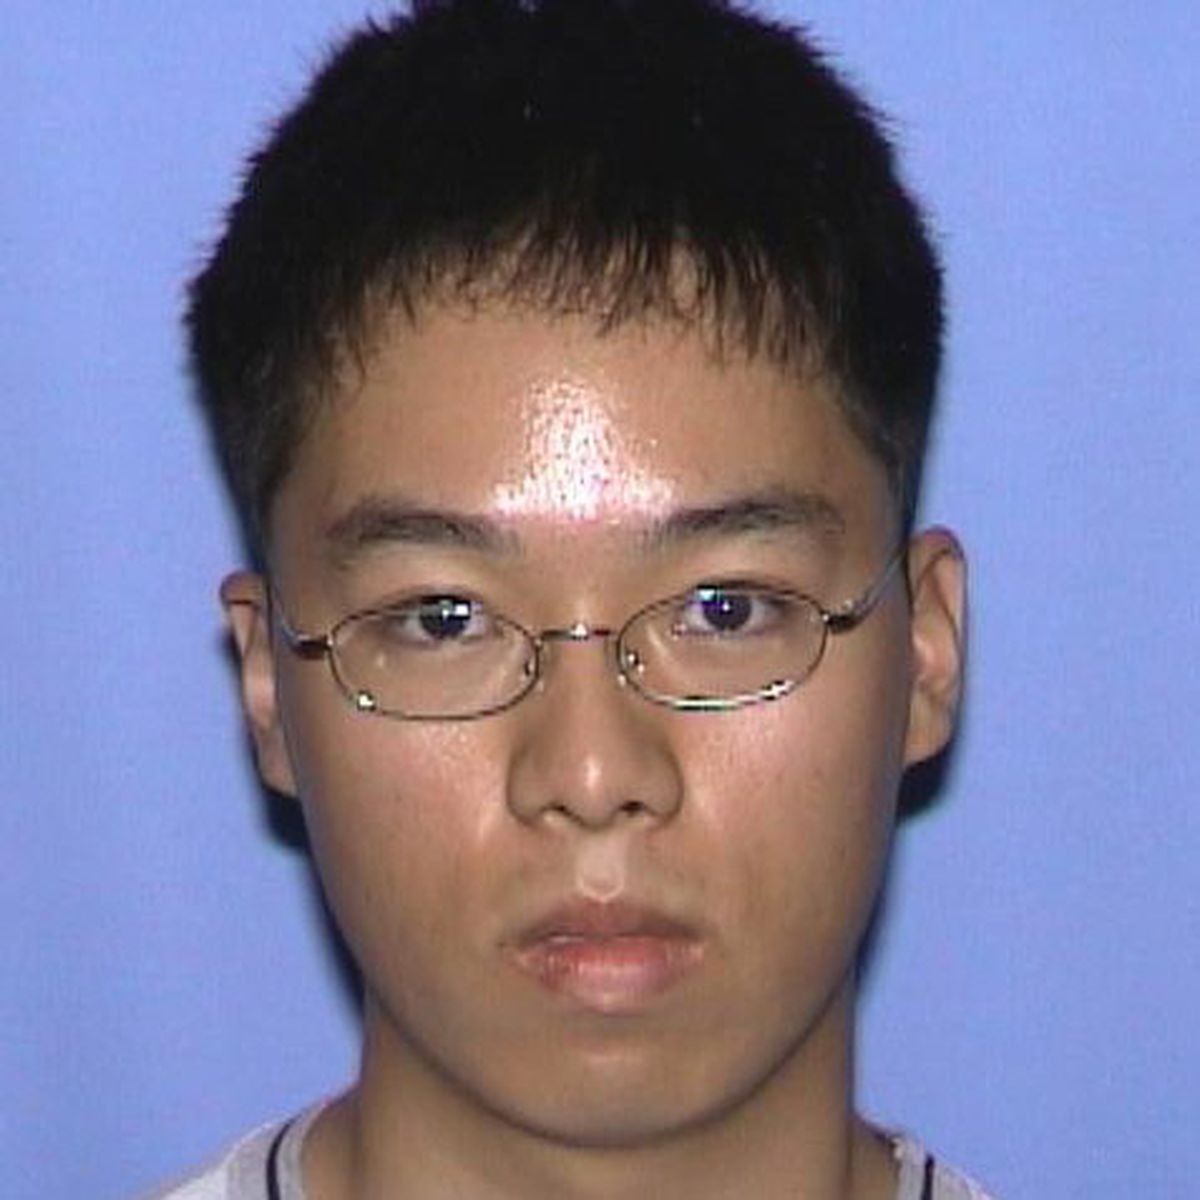 Seung-Hui Cho, who killed 33 at Virginia Tech in 2007 (The Spokesman-Review)